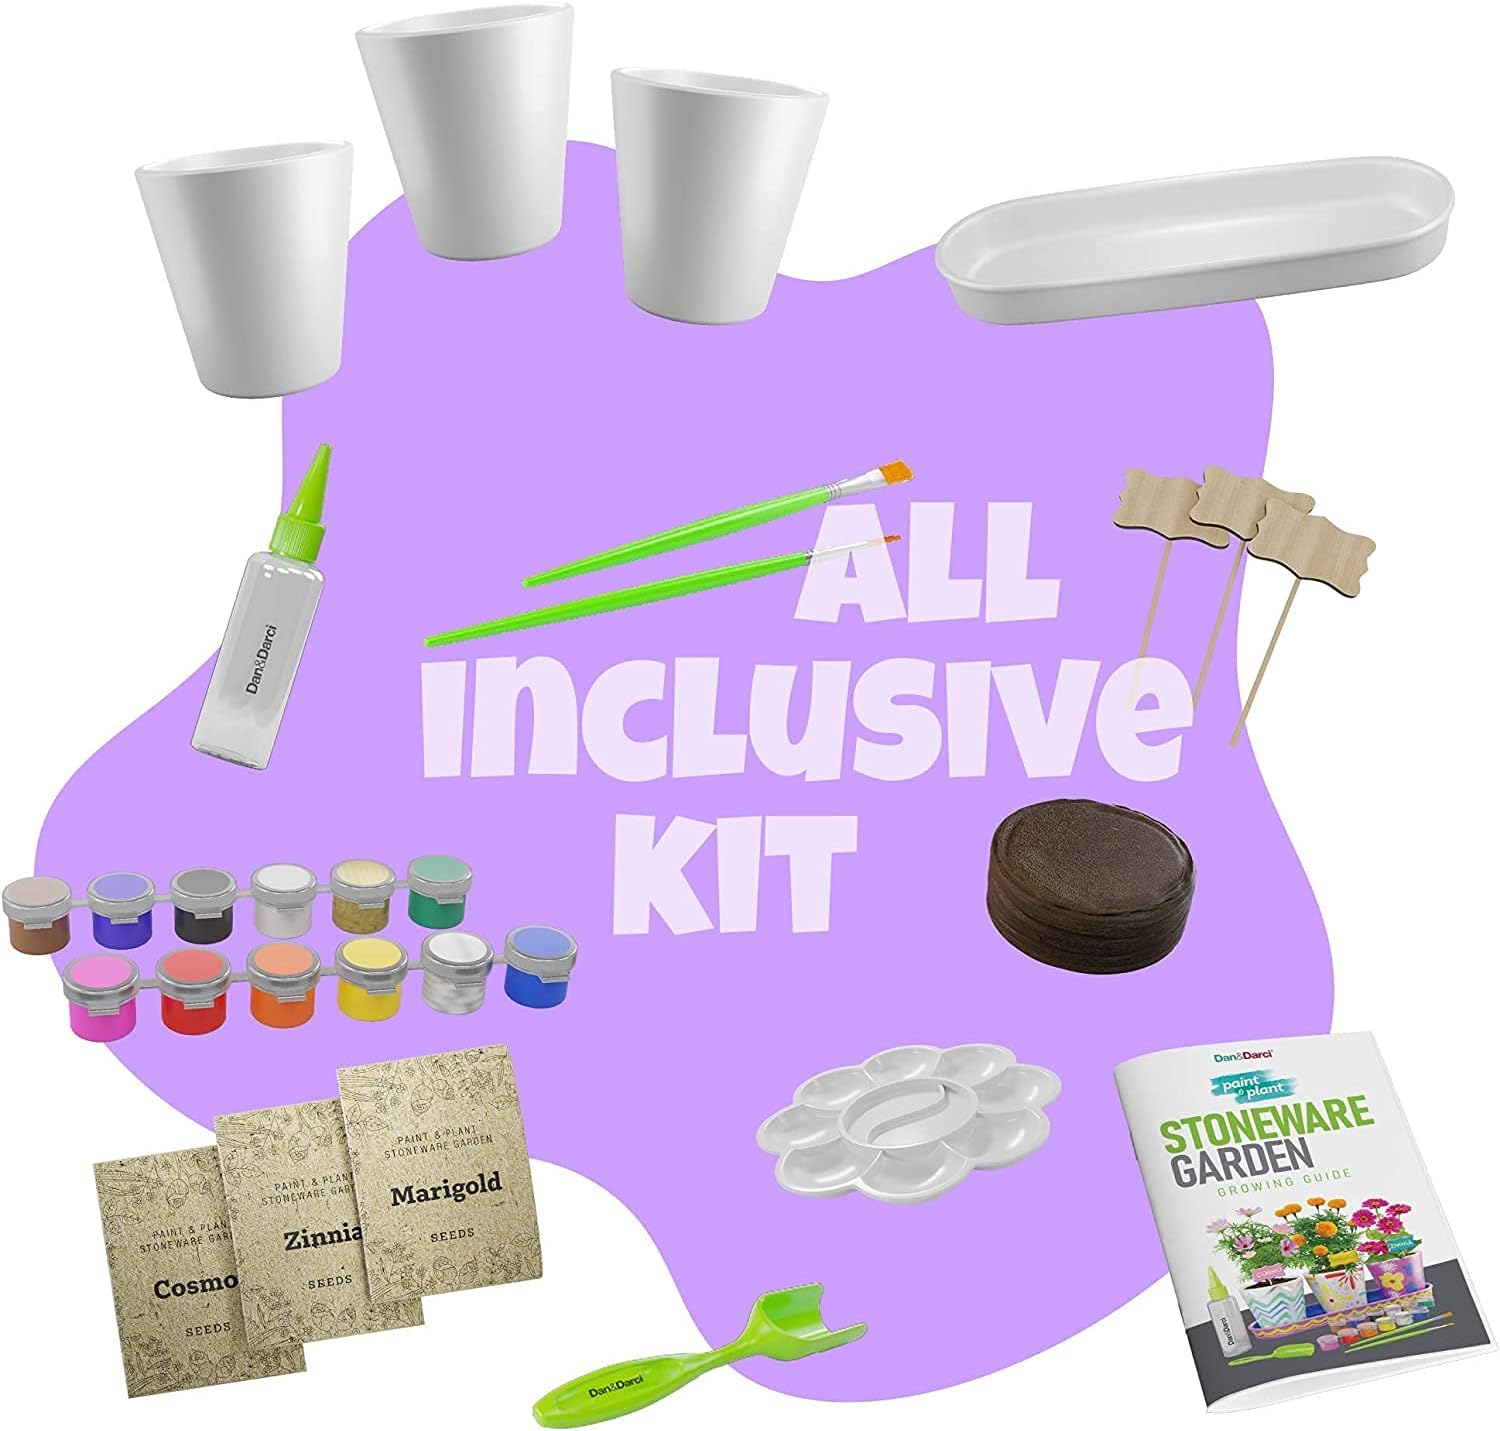 Growing Plants & Seeds Accessories Set Pots Indoor Garden Science STEM Toys Gift Crafts Birthday Arts Kits Ages 4 5 6 7 8-12 Year Old Boys Girls Climaxfy Flower Gardening Supplies for Kids